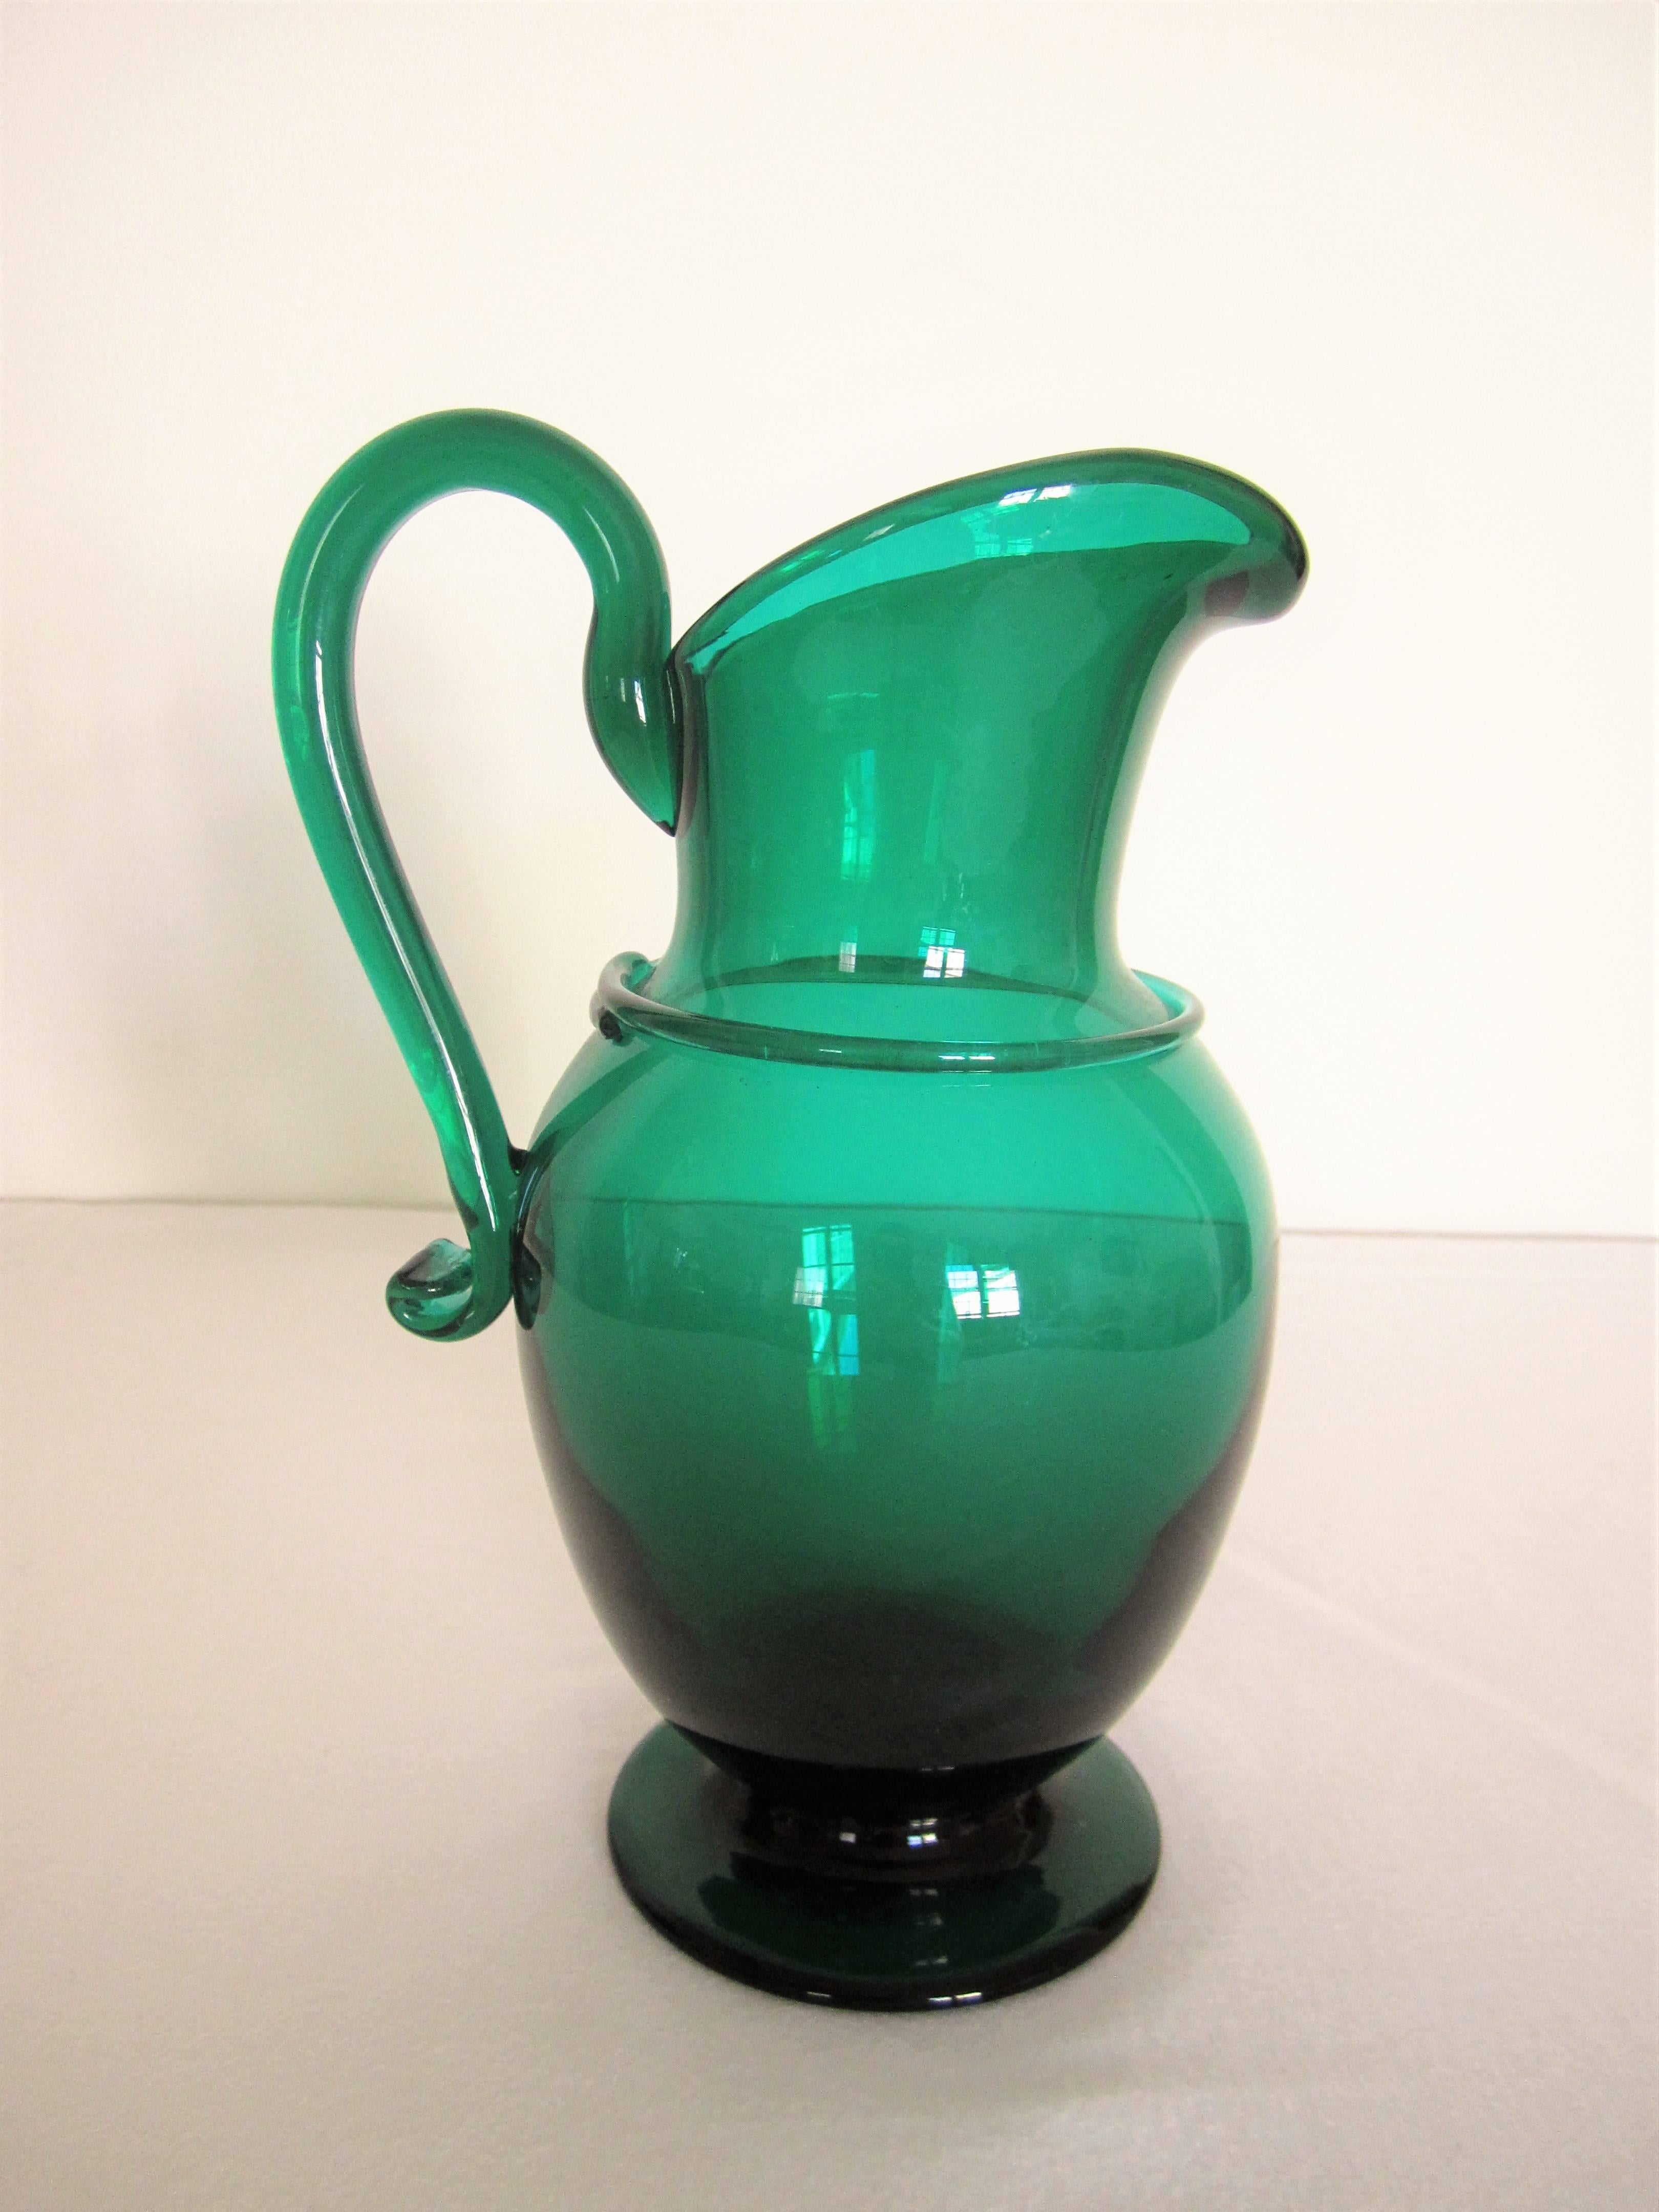 An emerald green handblown art glass pitcher or vase. Beautiful as a standalone piece or with flowers. 

Measures 9.75